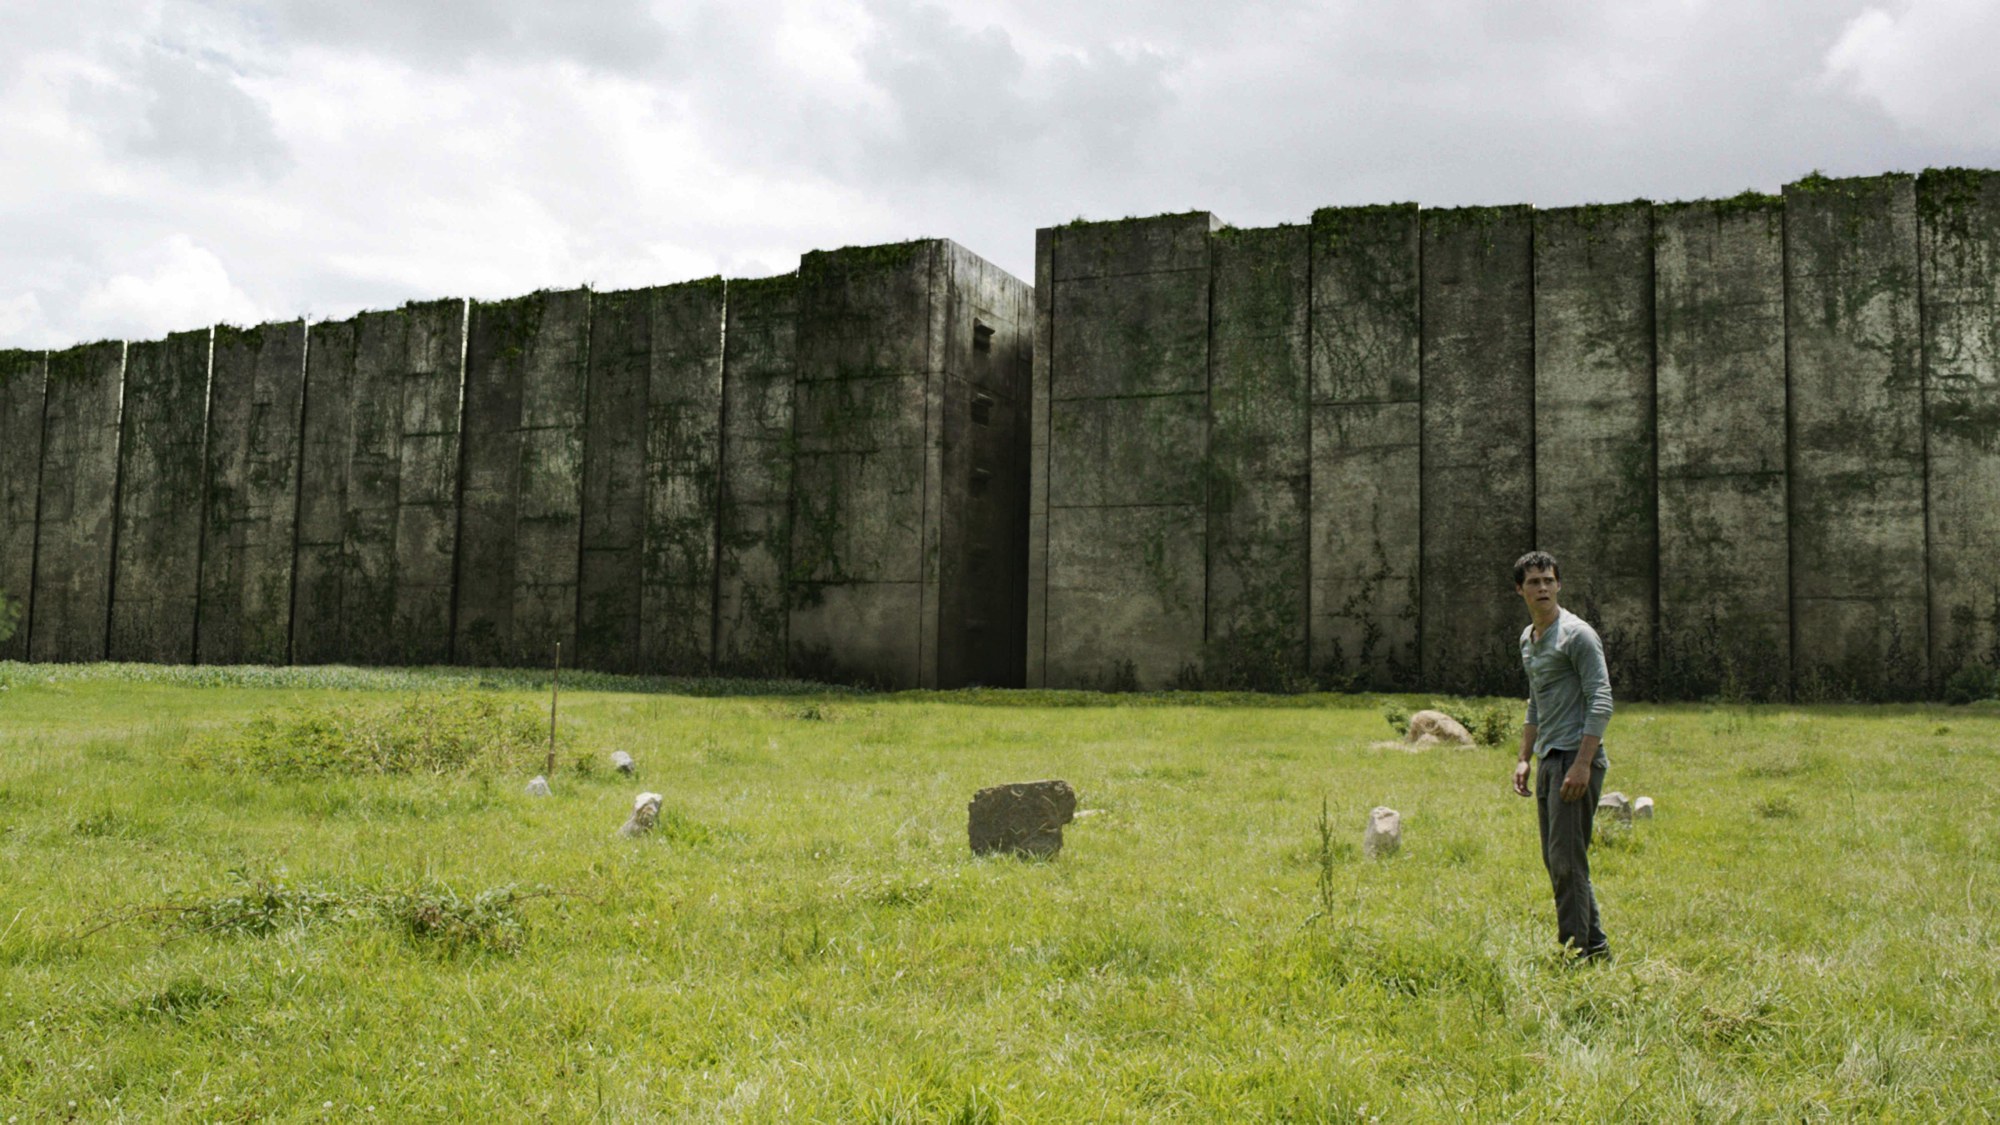 50 Things I Learned On The Set Of 'The Maze Runner